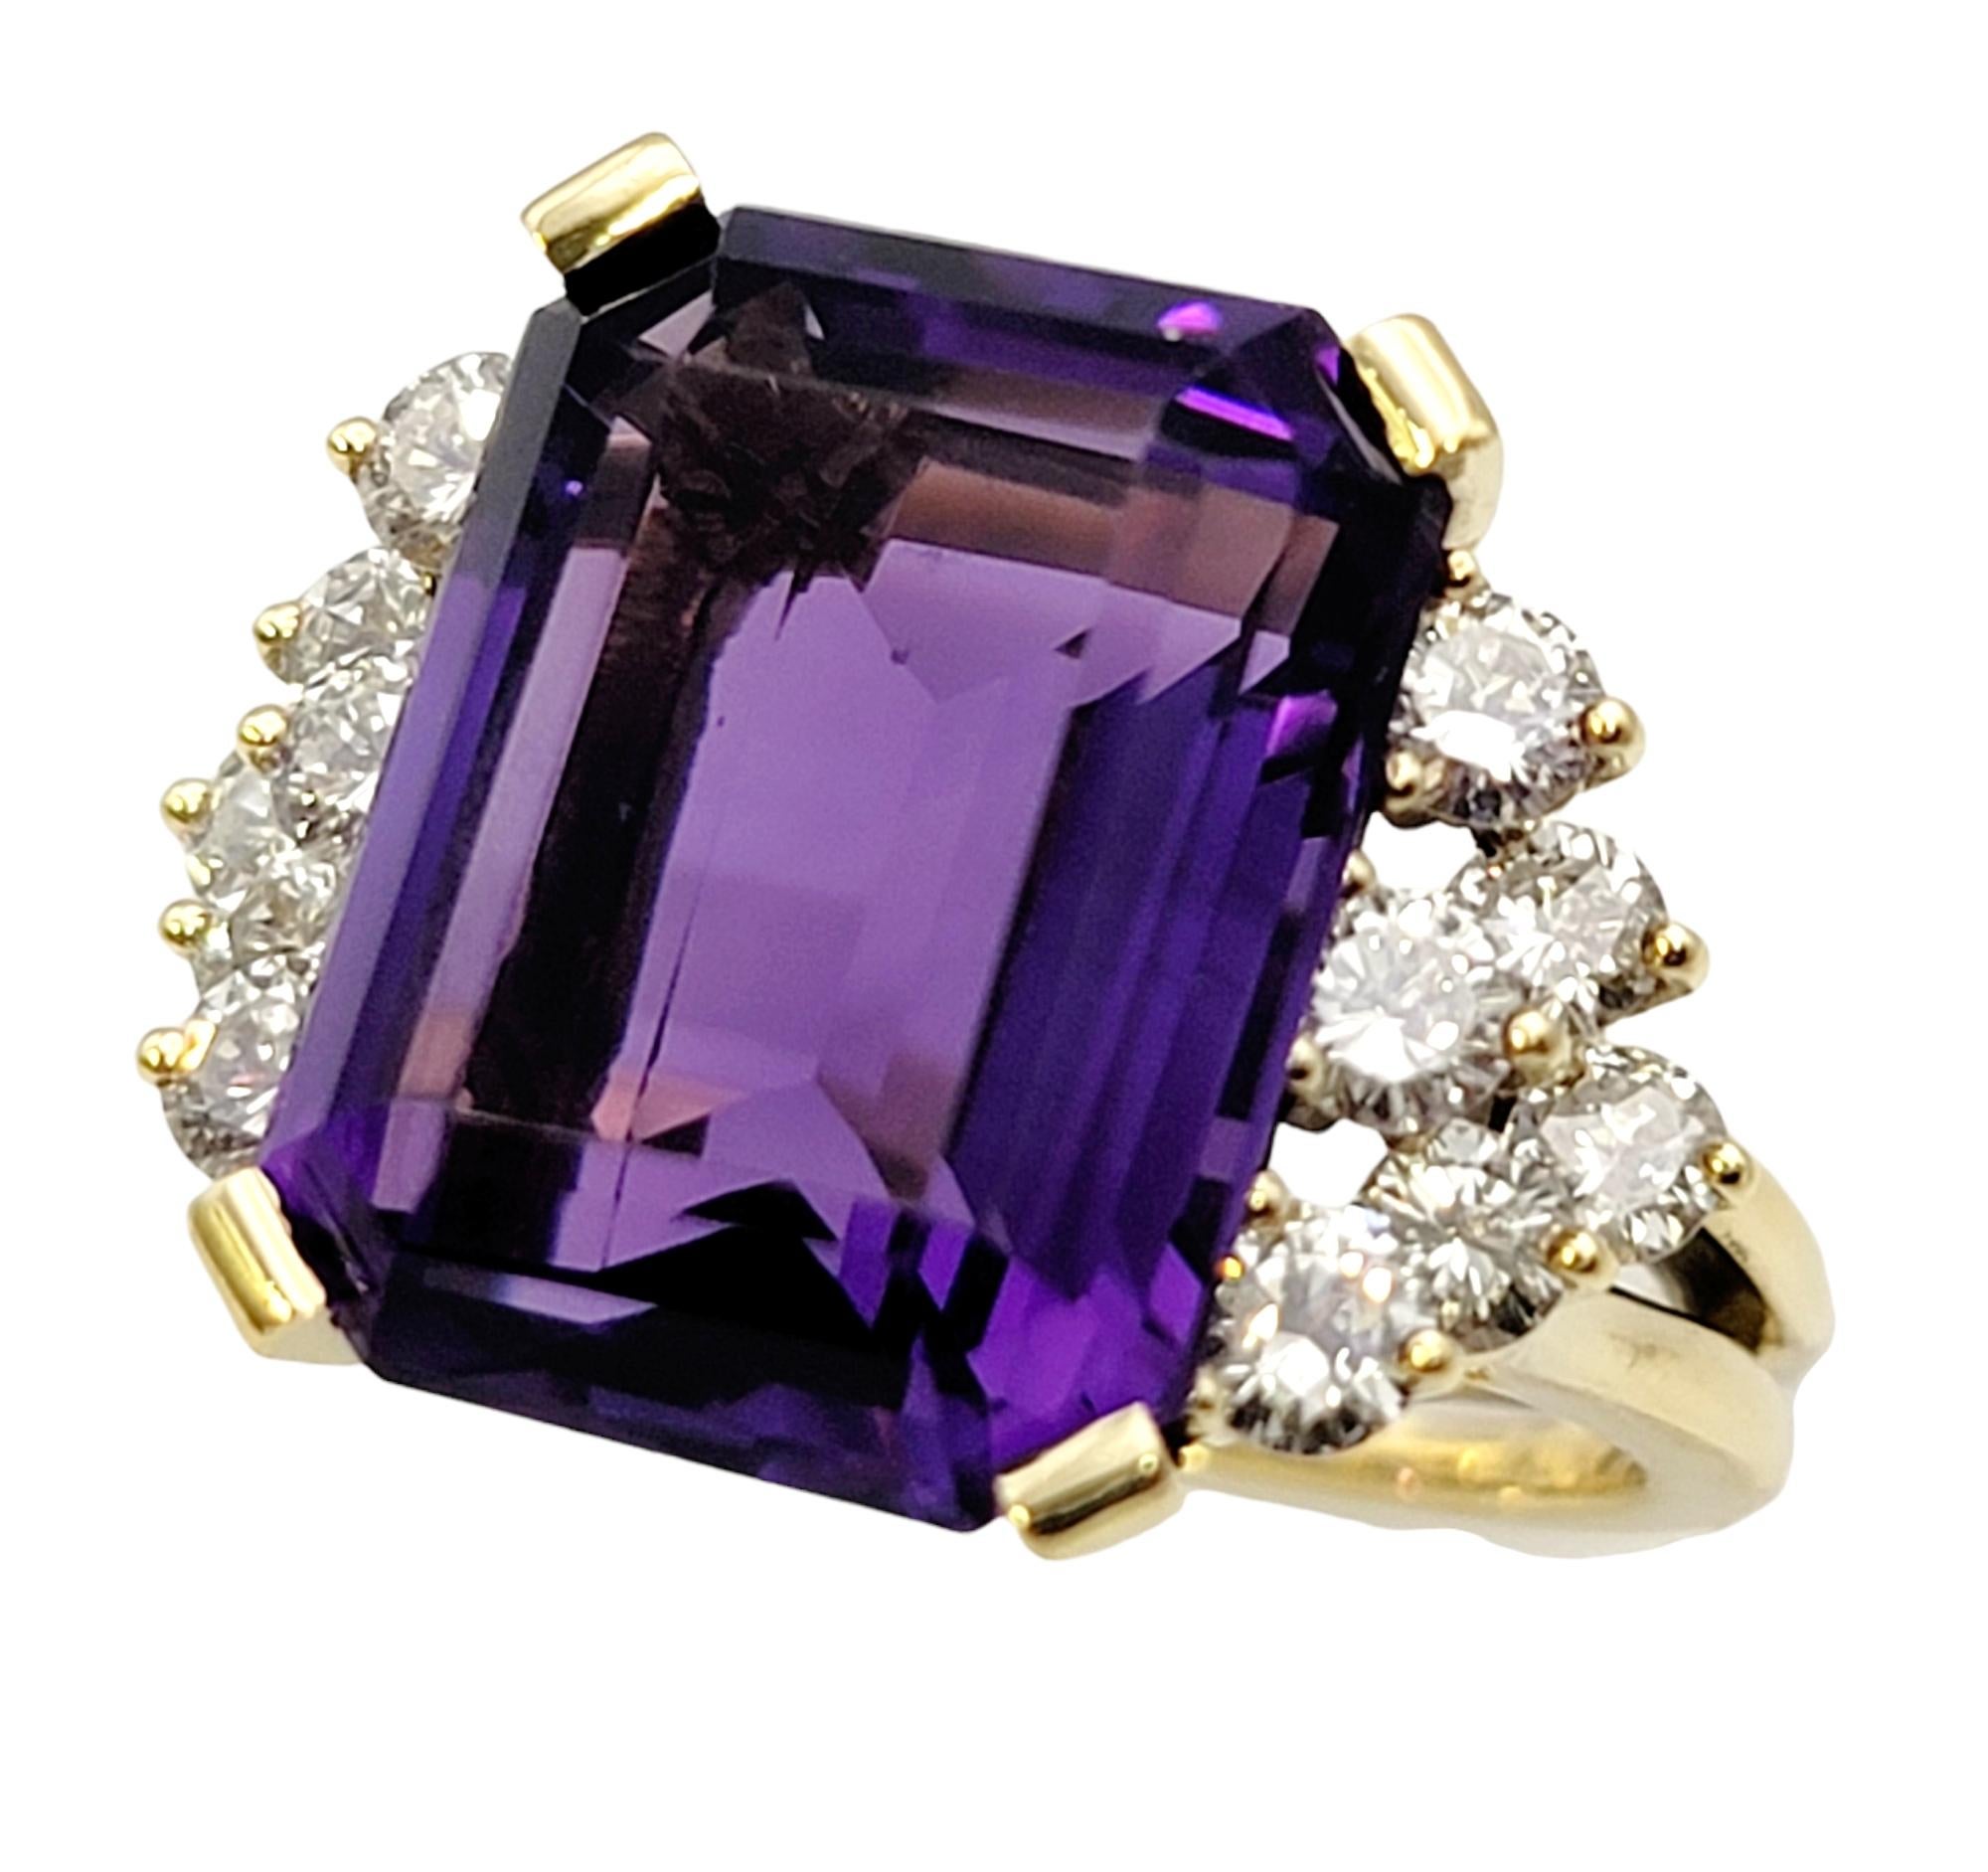 Emerald Cut Amethyst and Diamond Cluster Split Shank Cocktail Ring 18 Karat Gold In Good Condition For Sale In Scottsdale, AZ